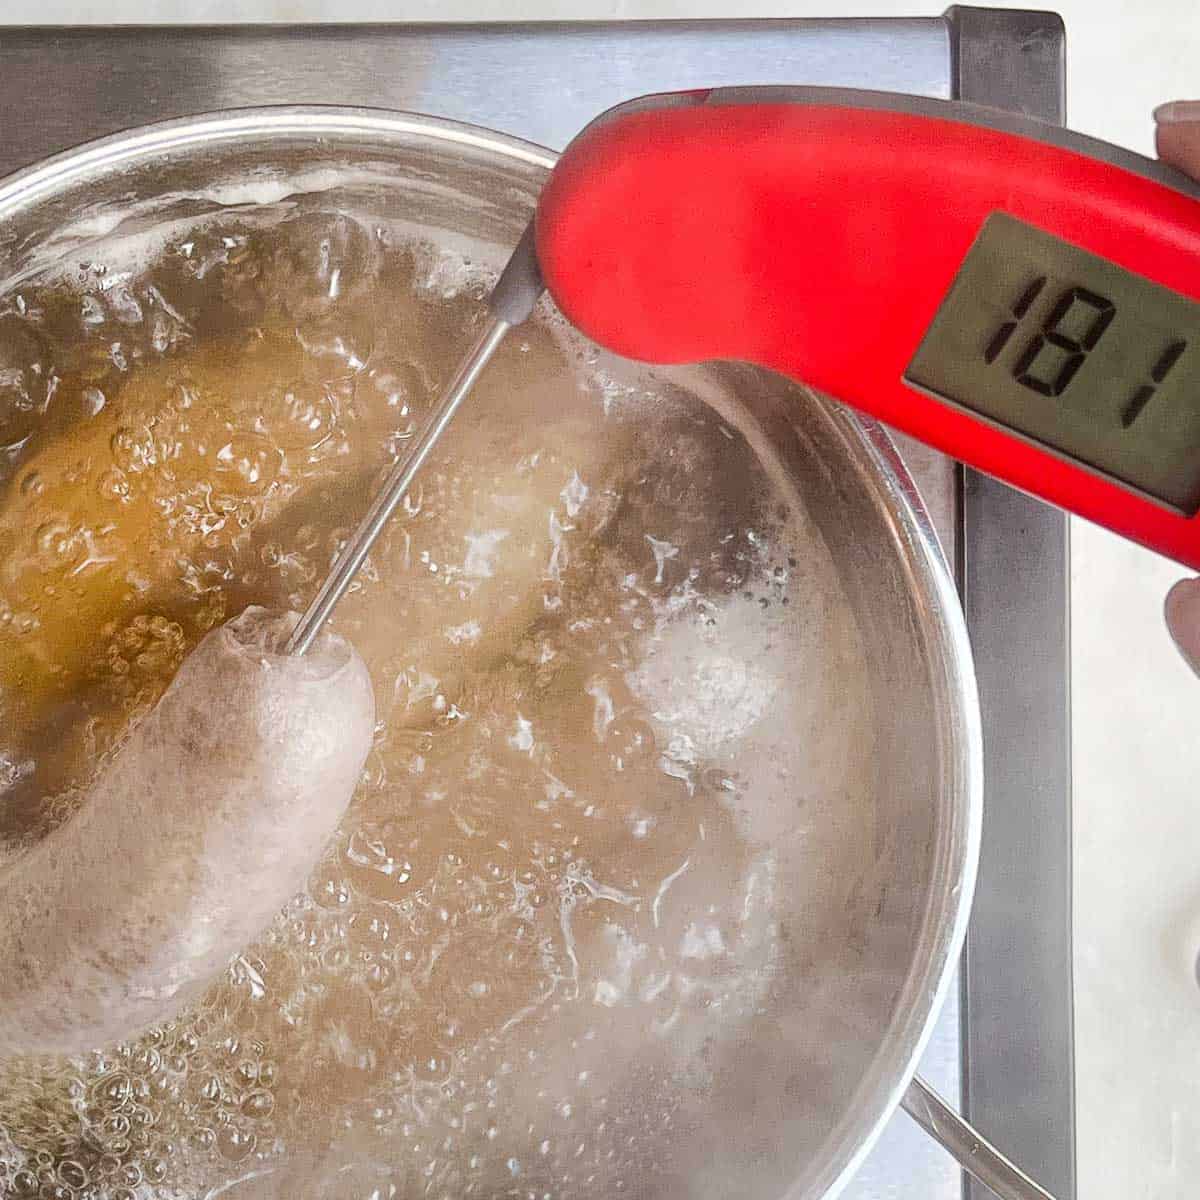 Brats boiling in beer with a red instant-read thermometer inserted into a brat reading 181°F.